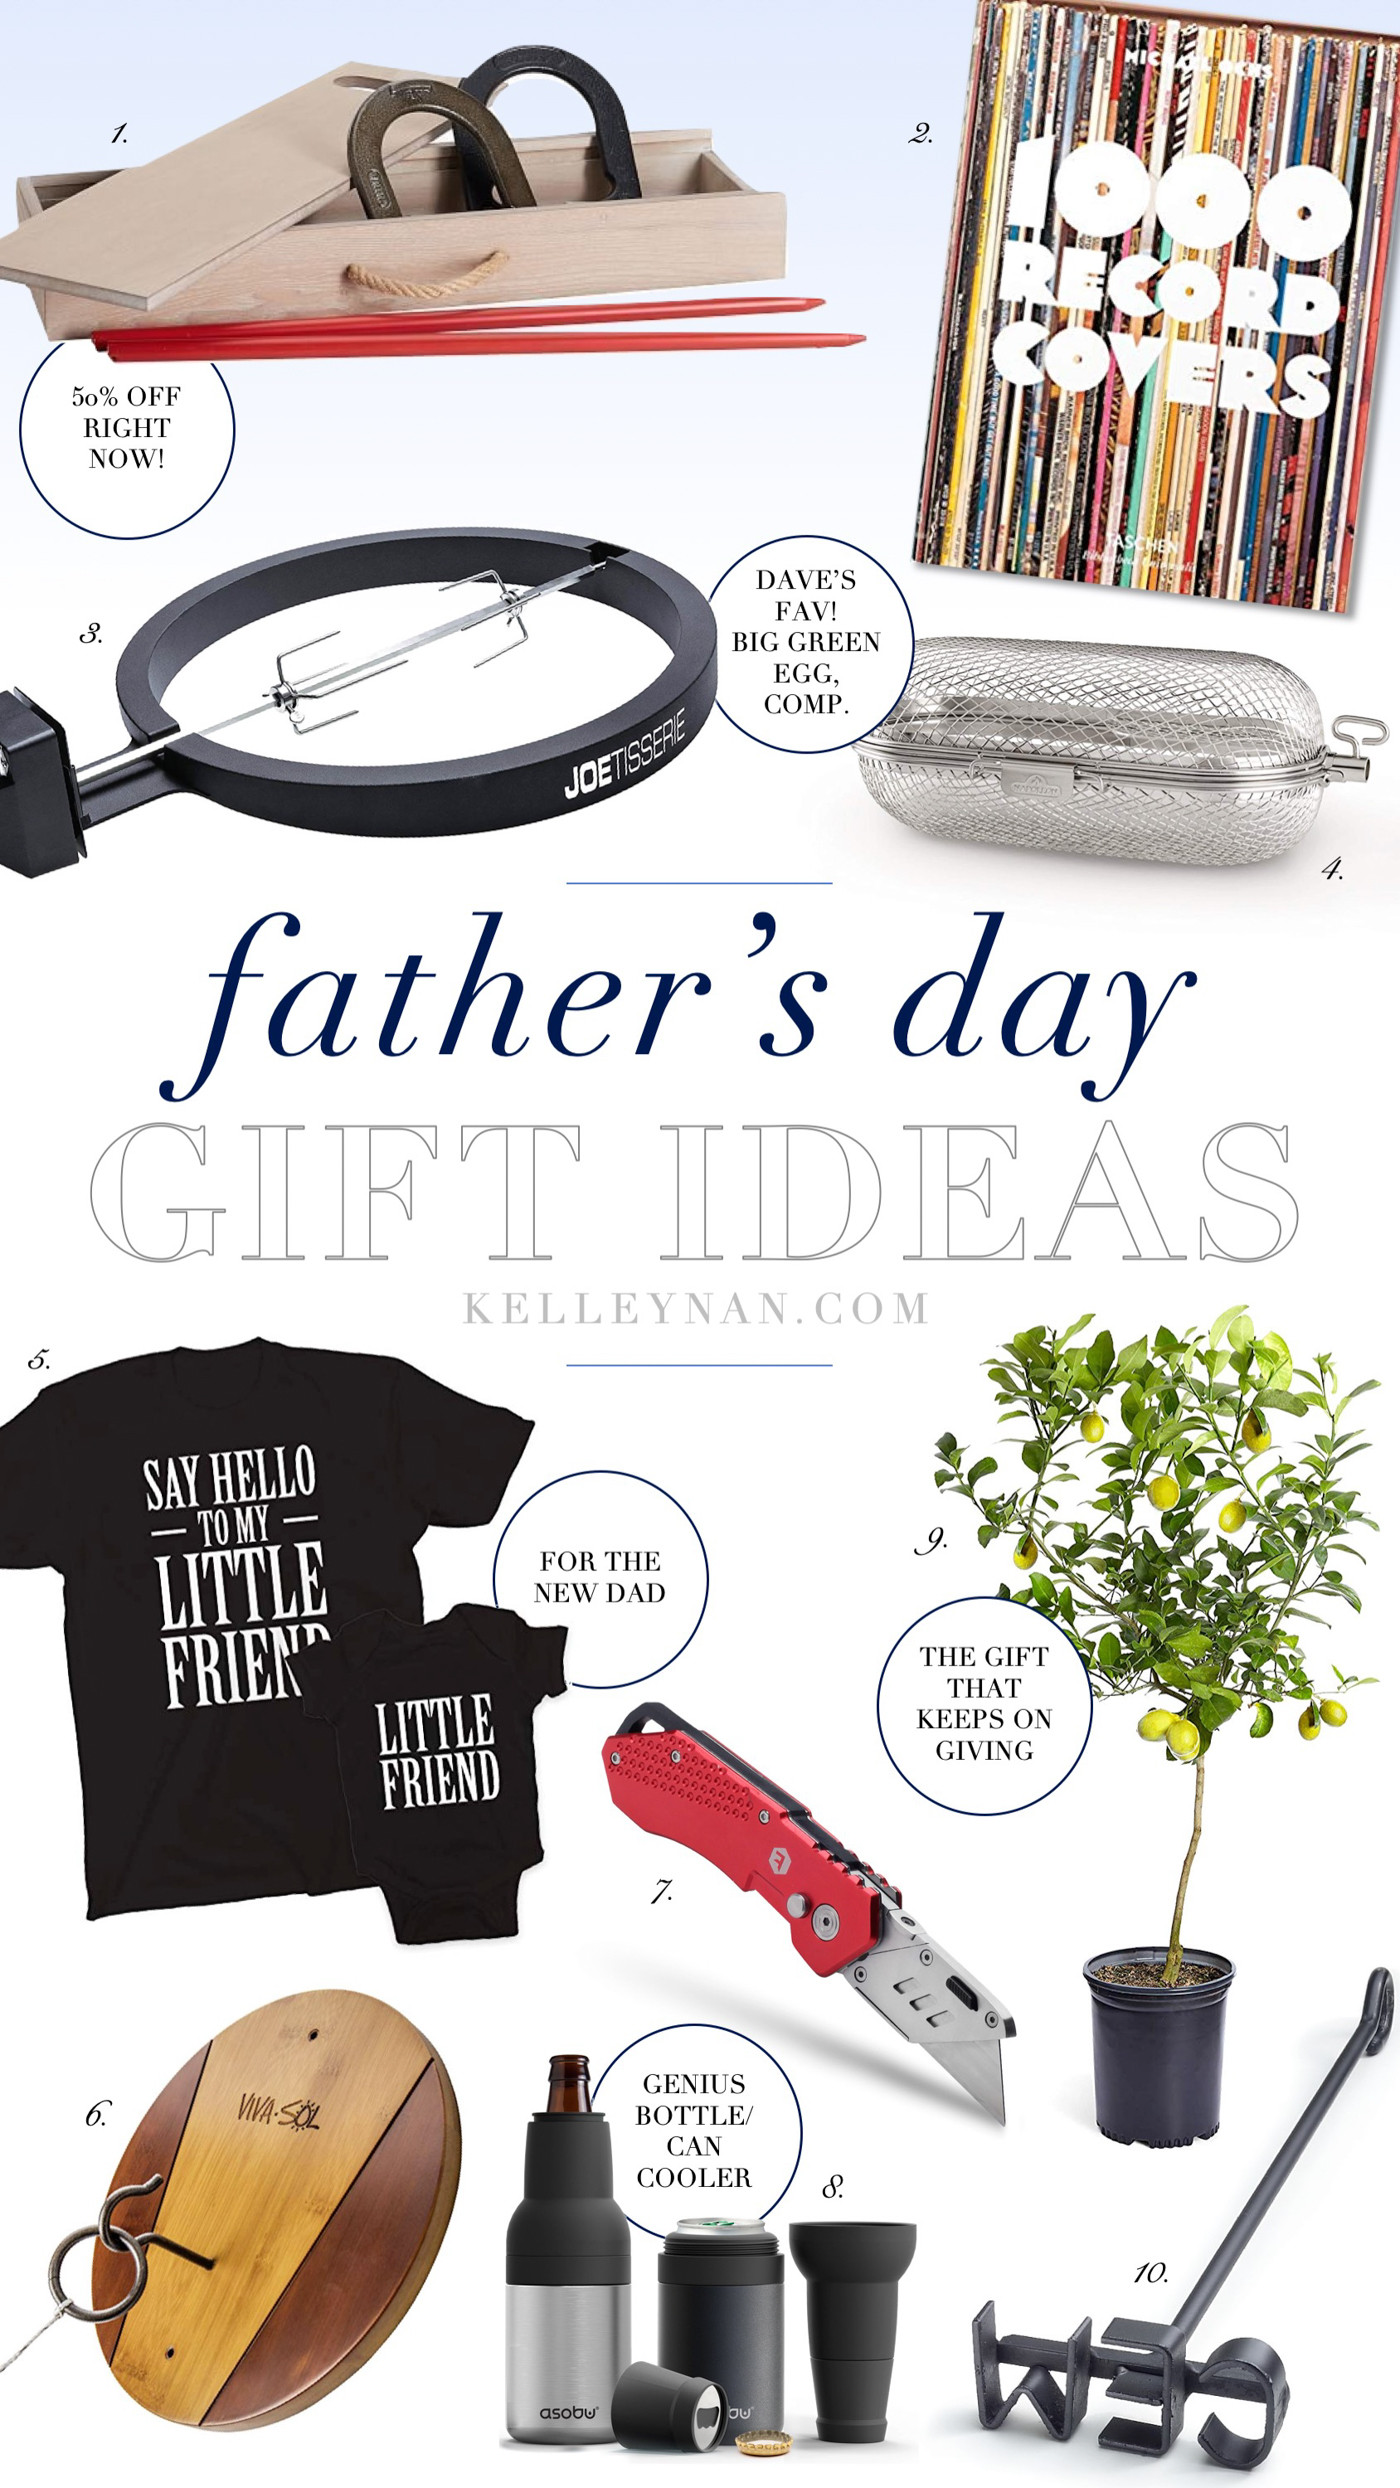 Expectant Fathers Day Gift Ideas
 10 Father s Day Gift Ideas for Husbands Dads & Expectant